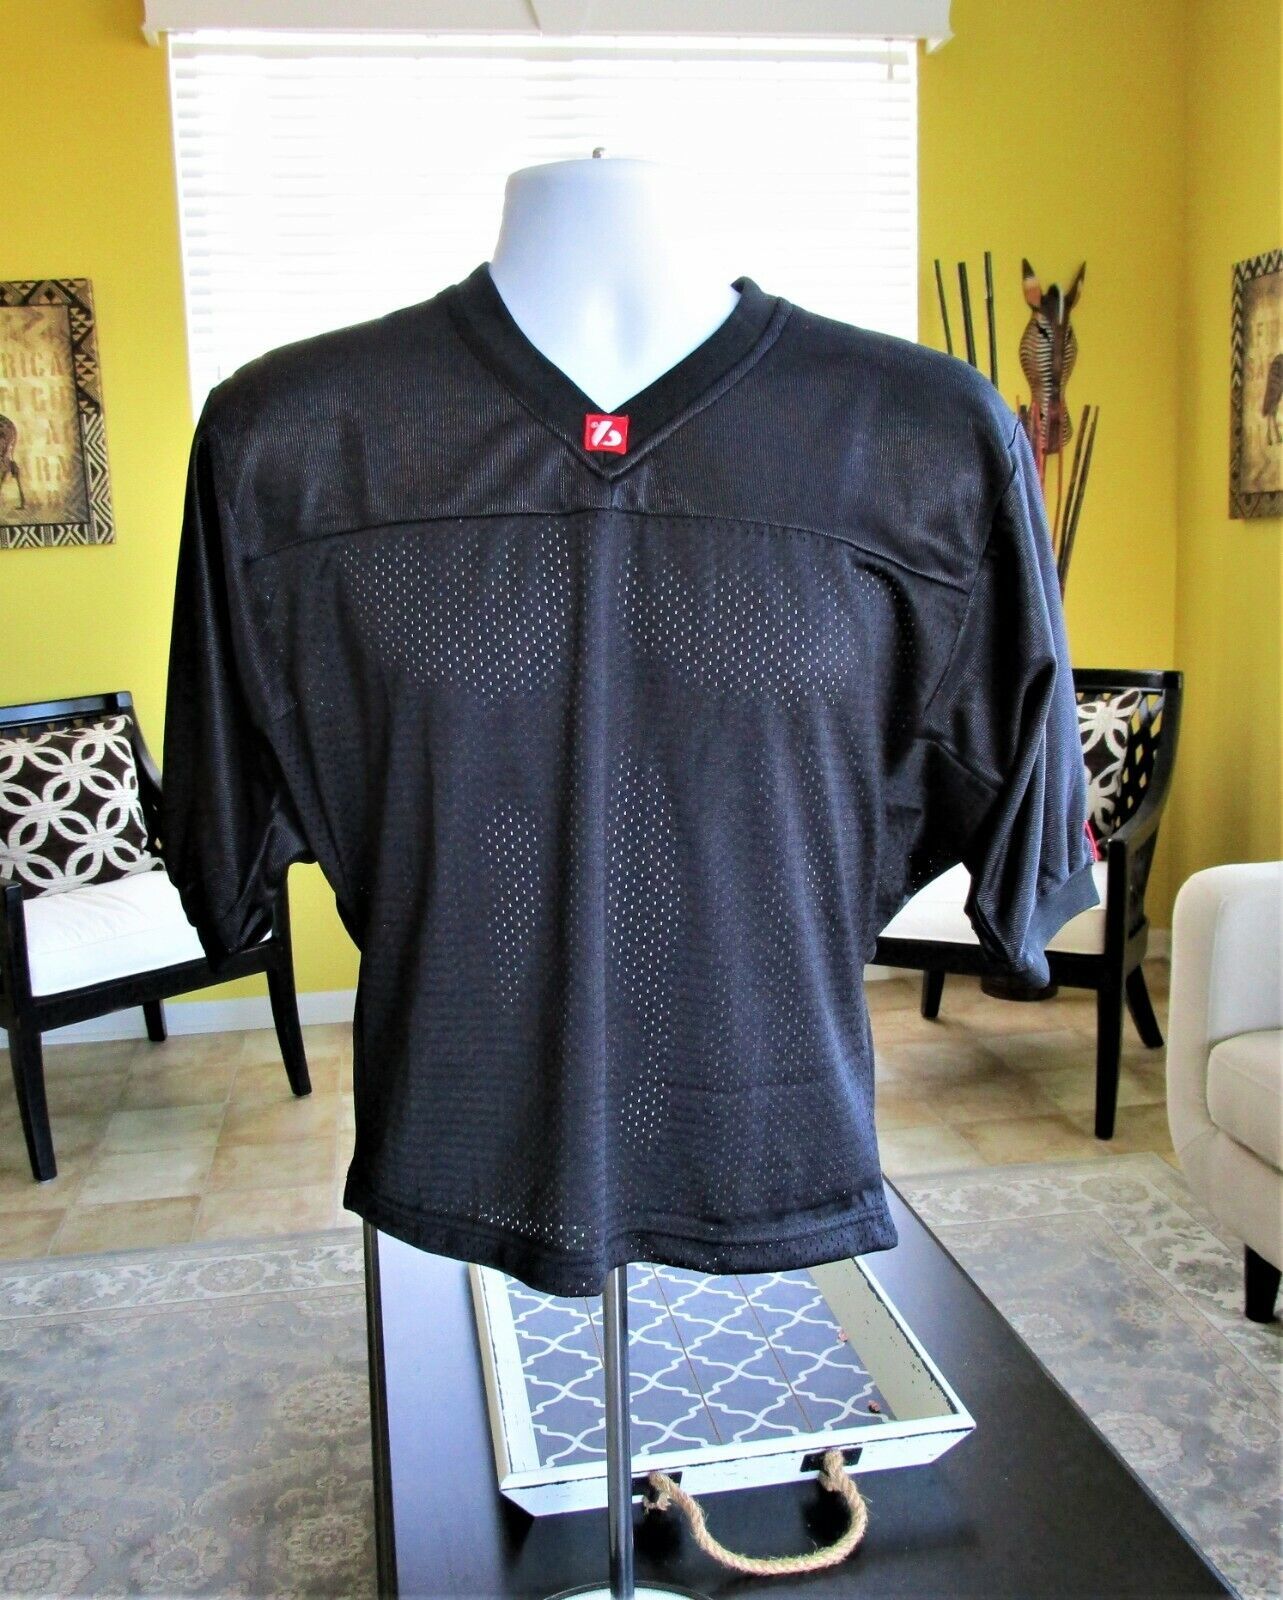 Primary image for Barnett Flag Football Jersey Sz XS Sports Apparel Shirt Athletic Activewear Top